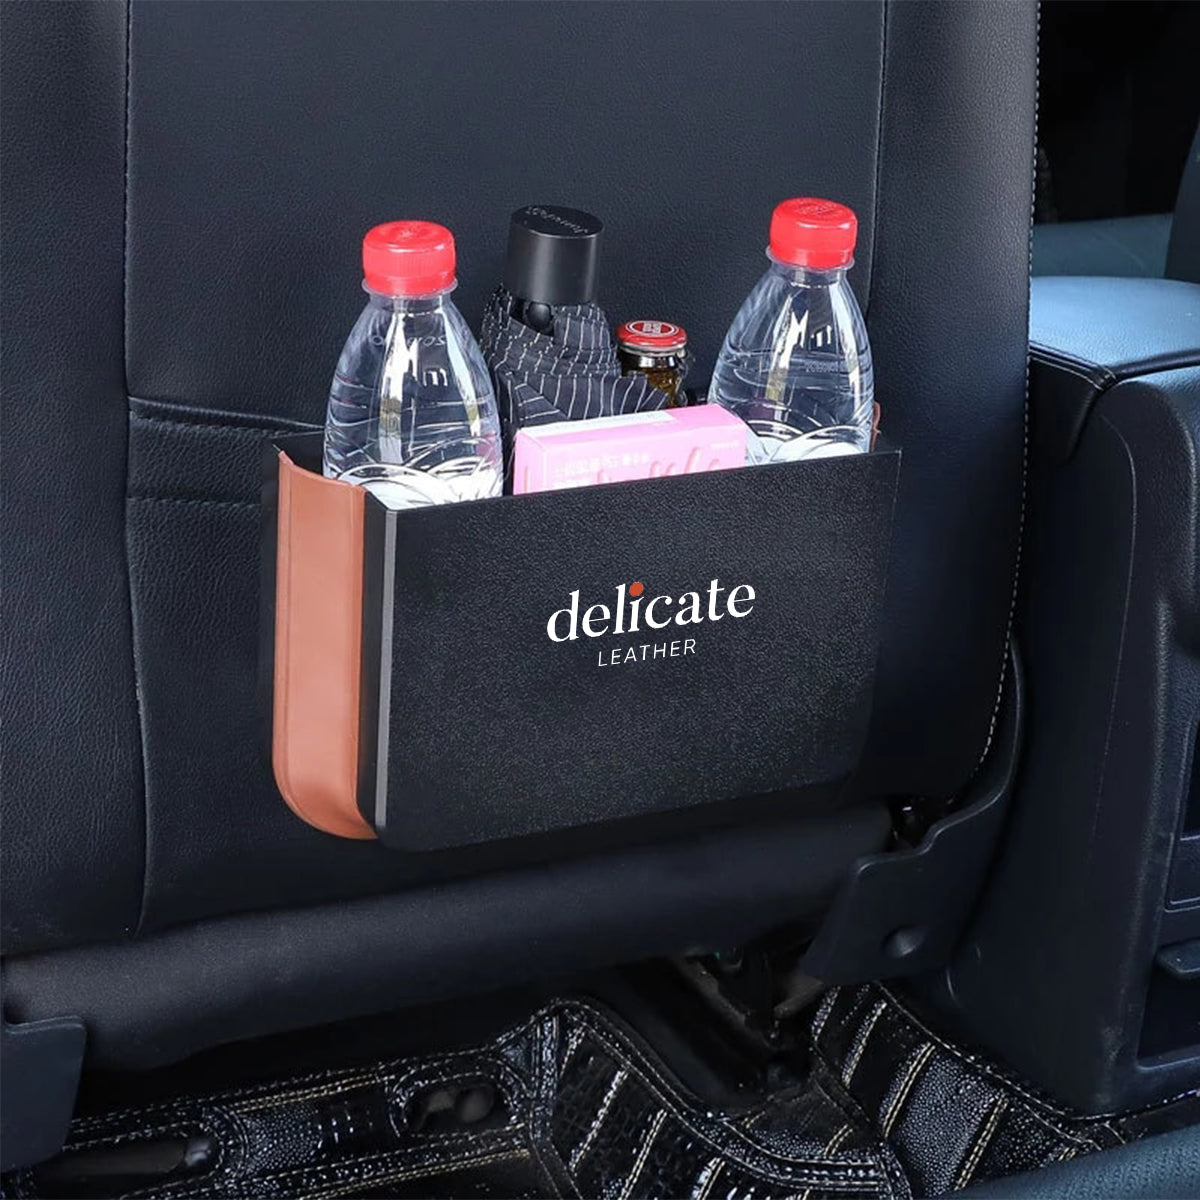 Delicate Leather Hanging Waterproof Car Trash can-Foldable, Custom For Your Cars, Waterproof, and Equipped with Cup Holders and Trays. Multi-Purpose, Car Accessories LM11992 - Delicate Leather